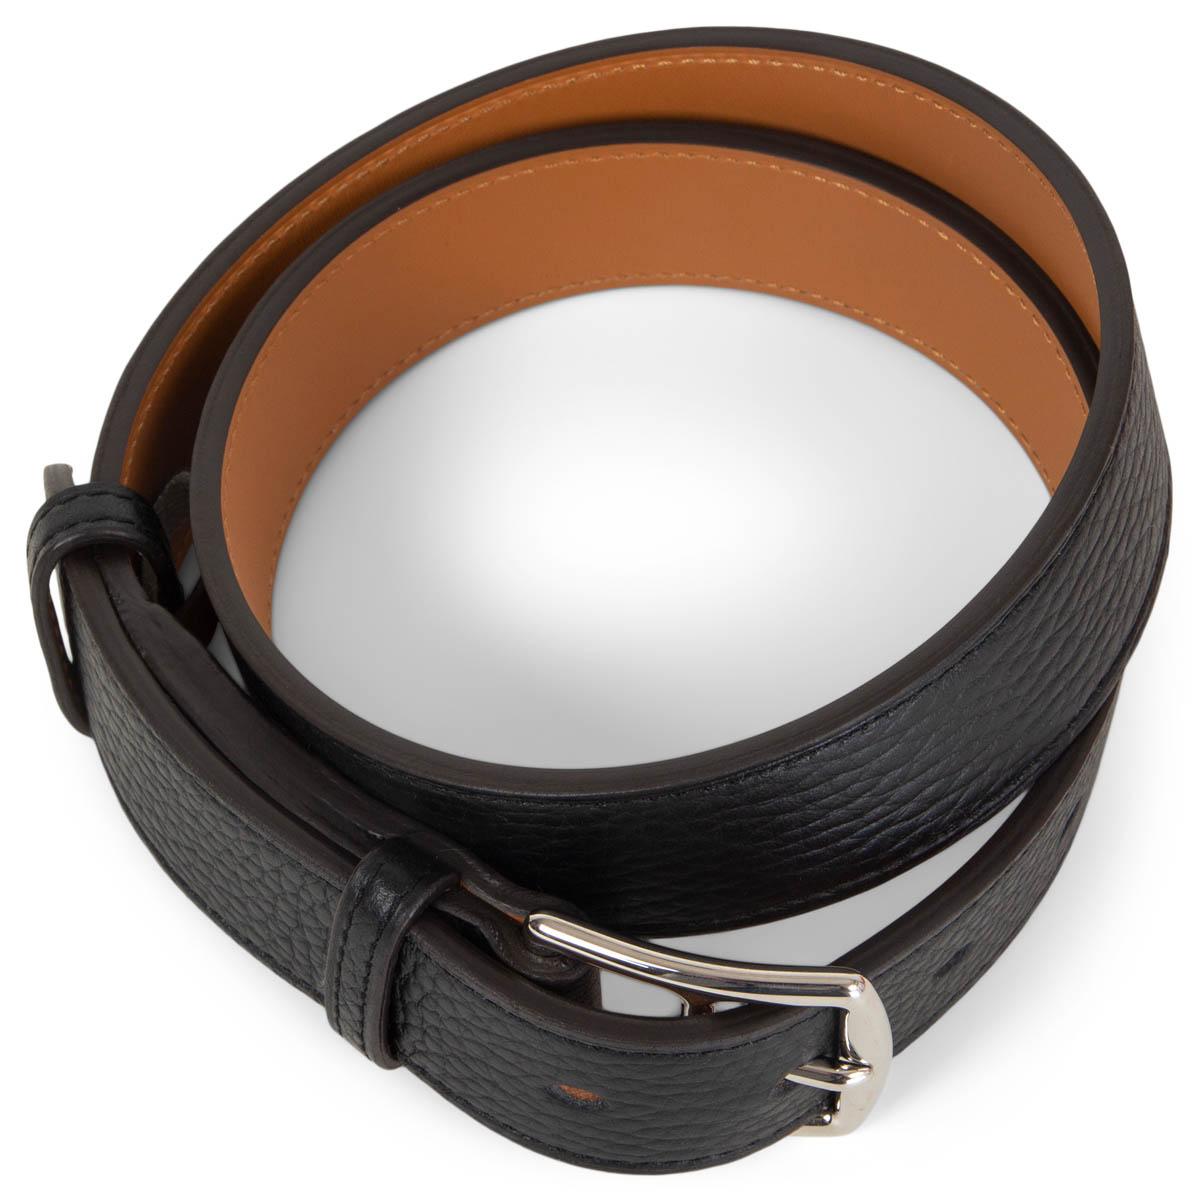 100% authentic Hermès Etriviere 32mm leather belt in black Taurillon Clemence with palladium plated buckle and H detail. Brand new. Comes with box.

Measurements
Tag Size	75
Width	3.2cm (1.2in)
Fits	67cm (26.1in) to 77cm (30in)
Length	92cm